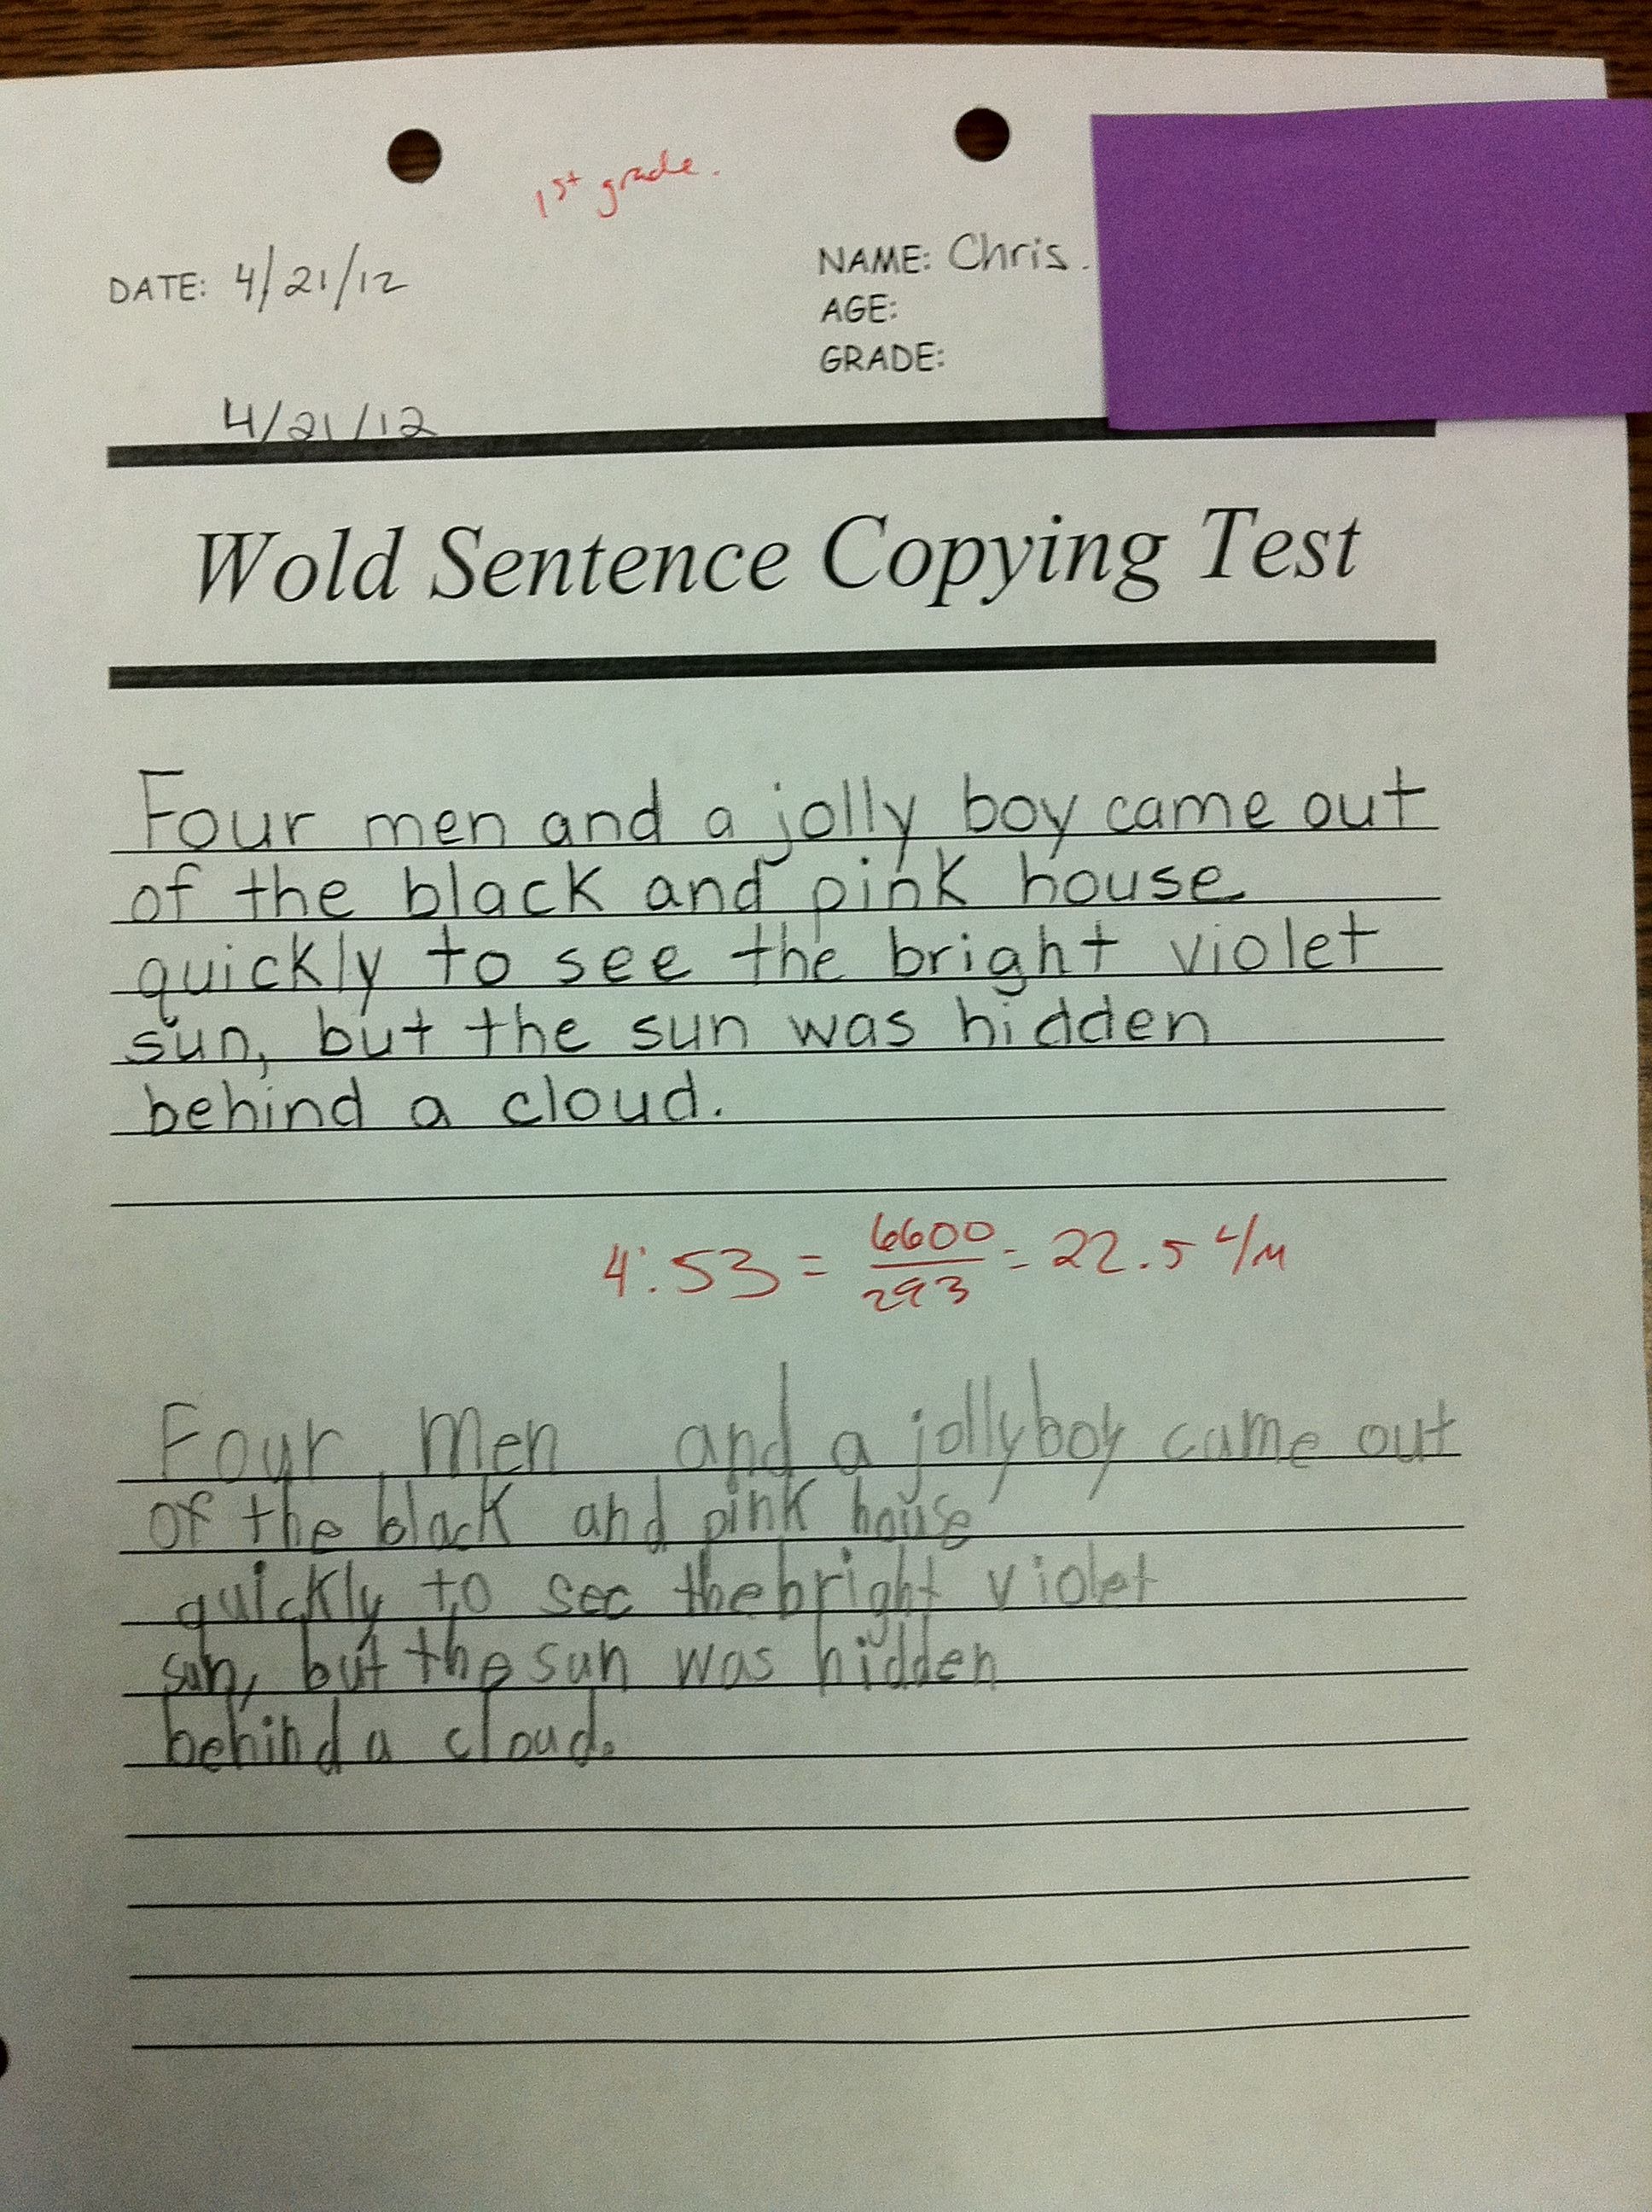 Is The Wold Sentence Copying Test Standardized